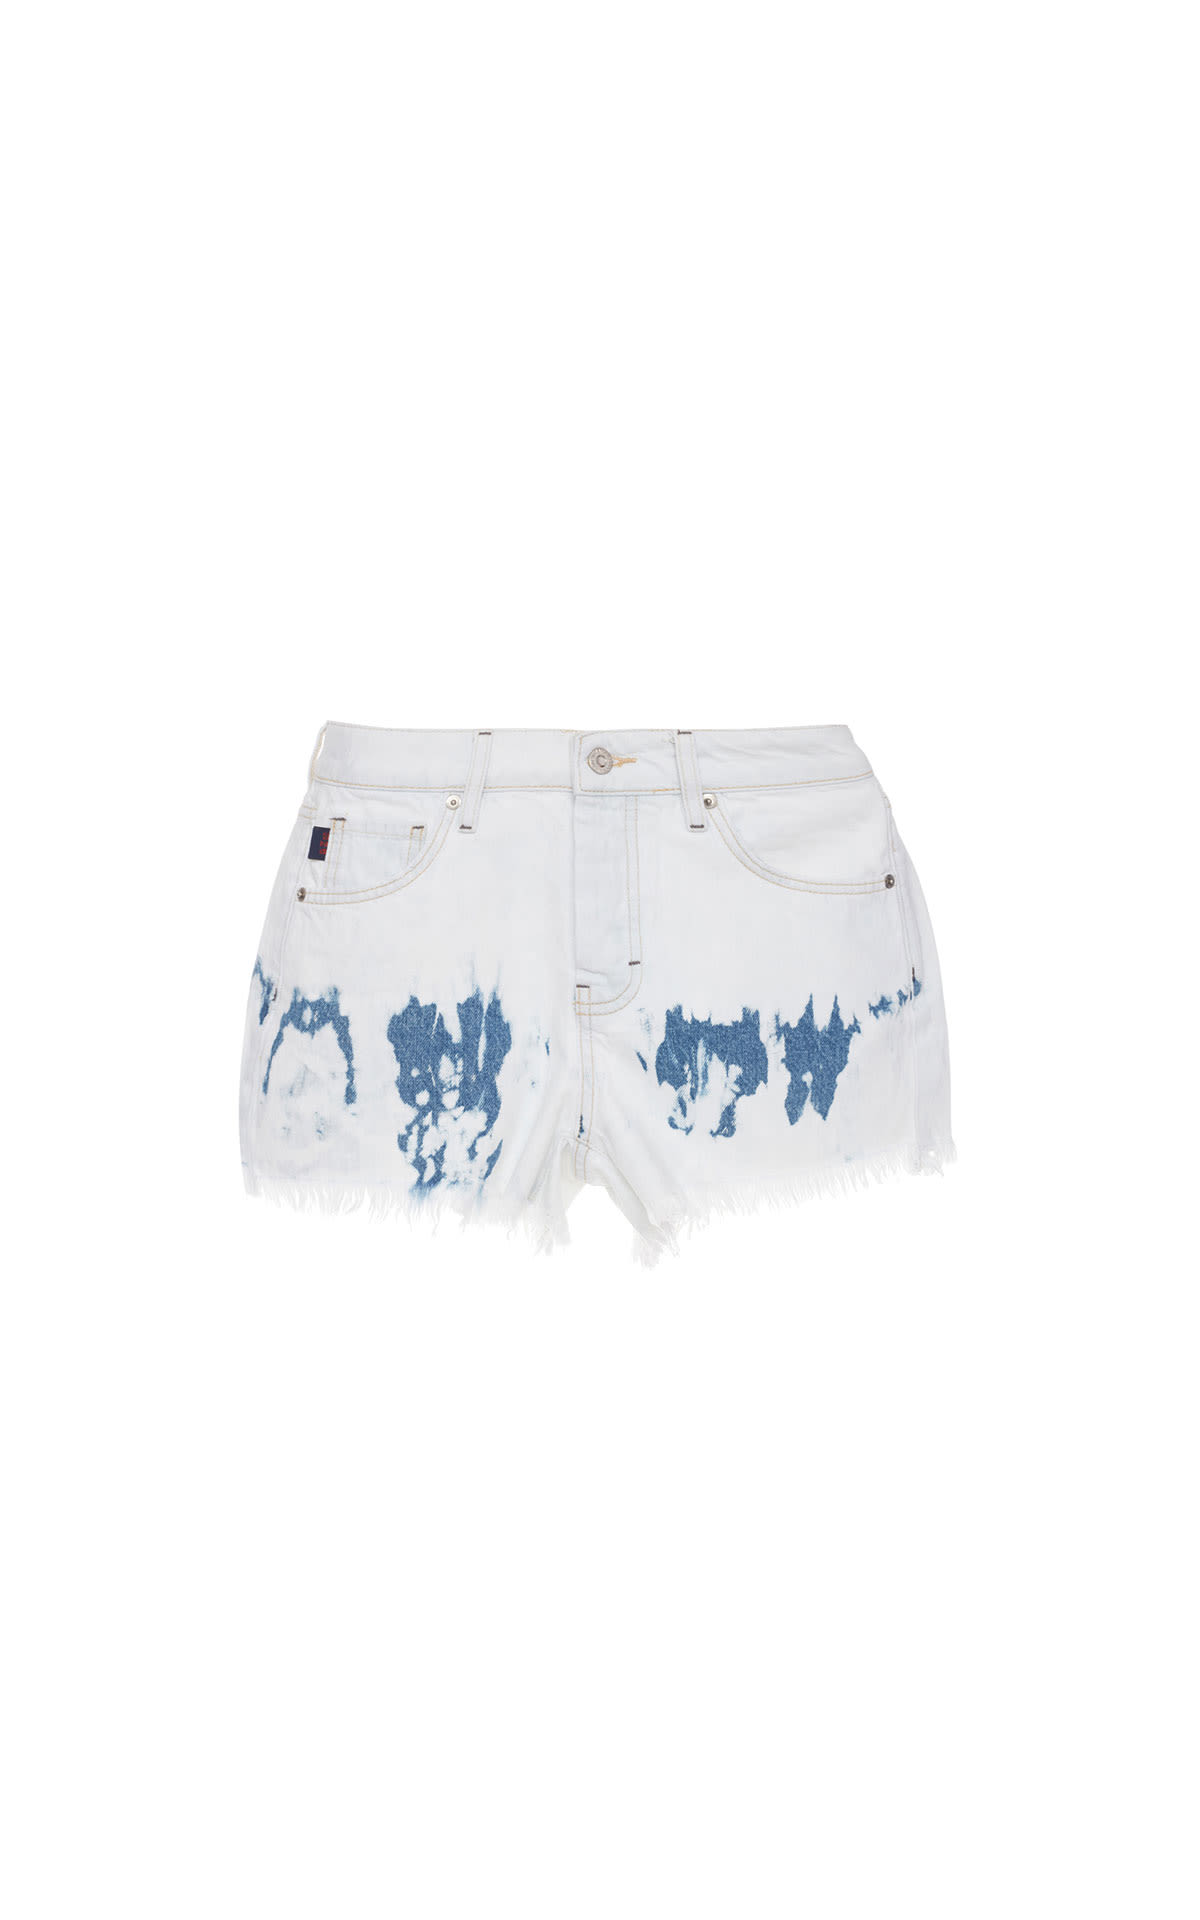 Superdry Cut off paint splash shorts from Bicester Village